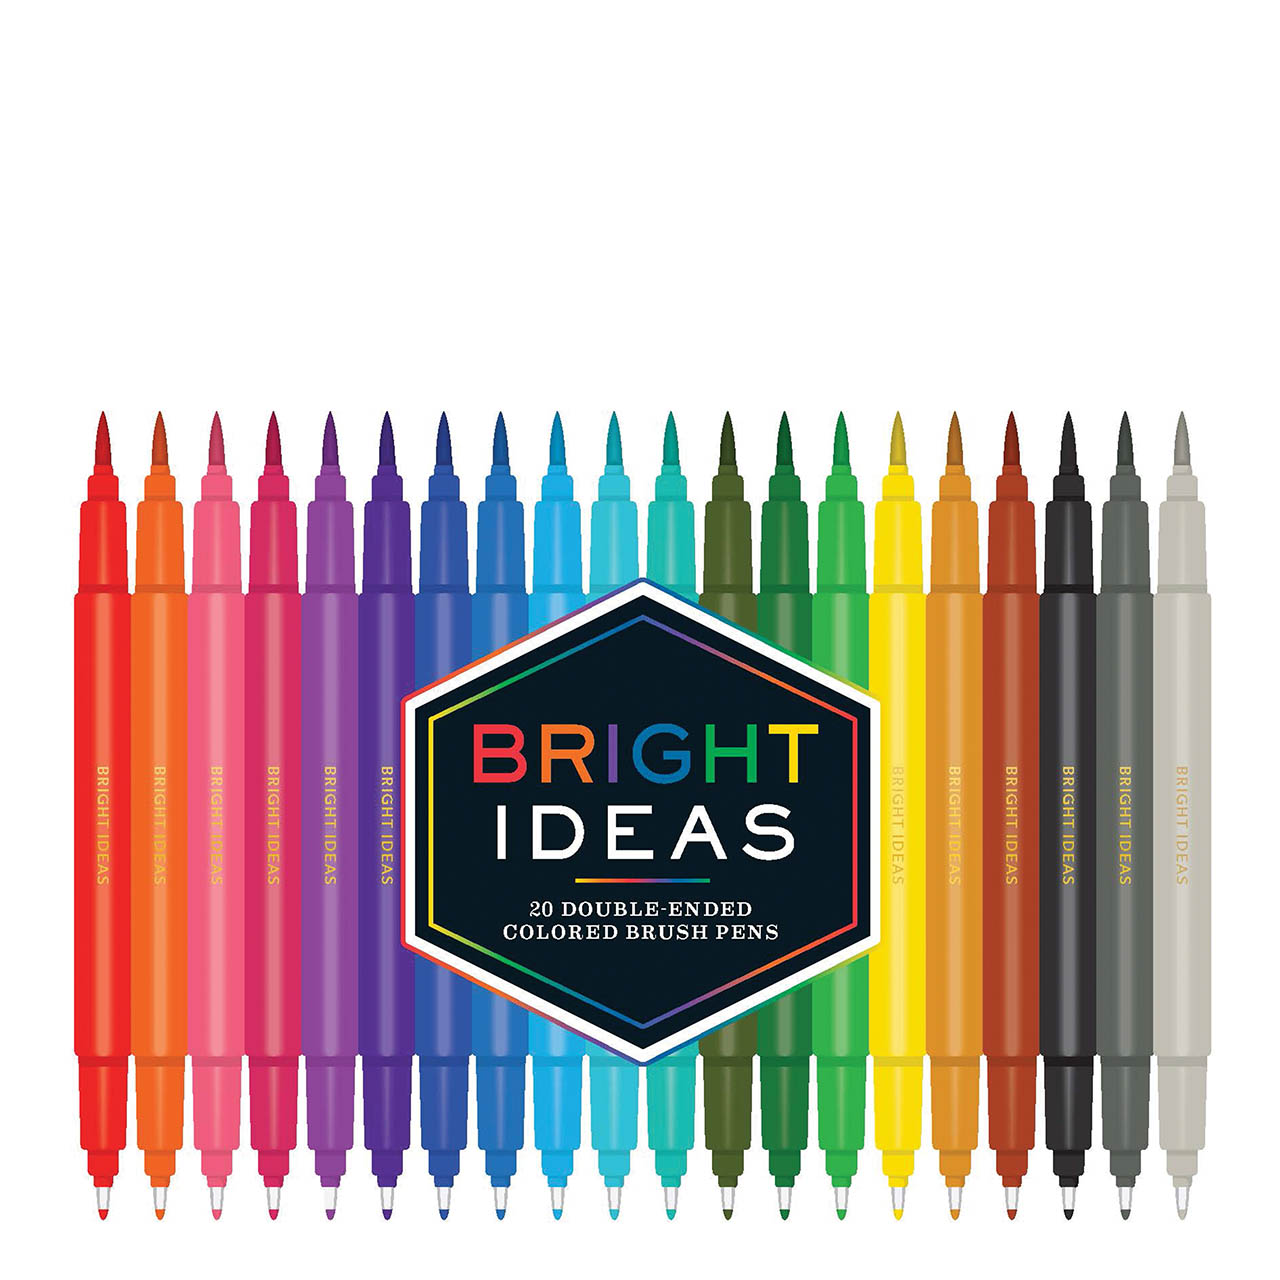 Bright Ideas: 8 Metallic Double-Ended Colored Brush Pens: (Dual